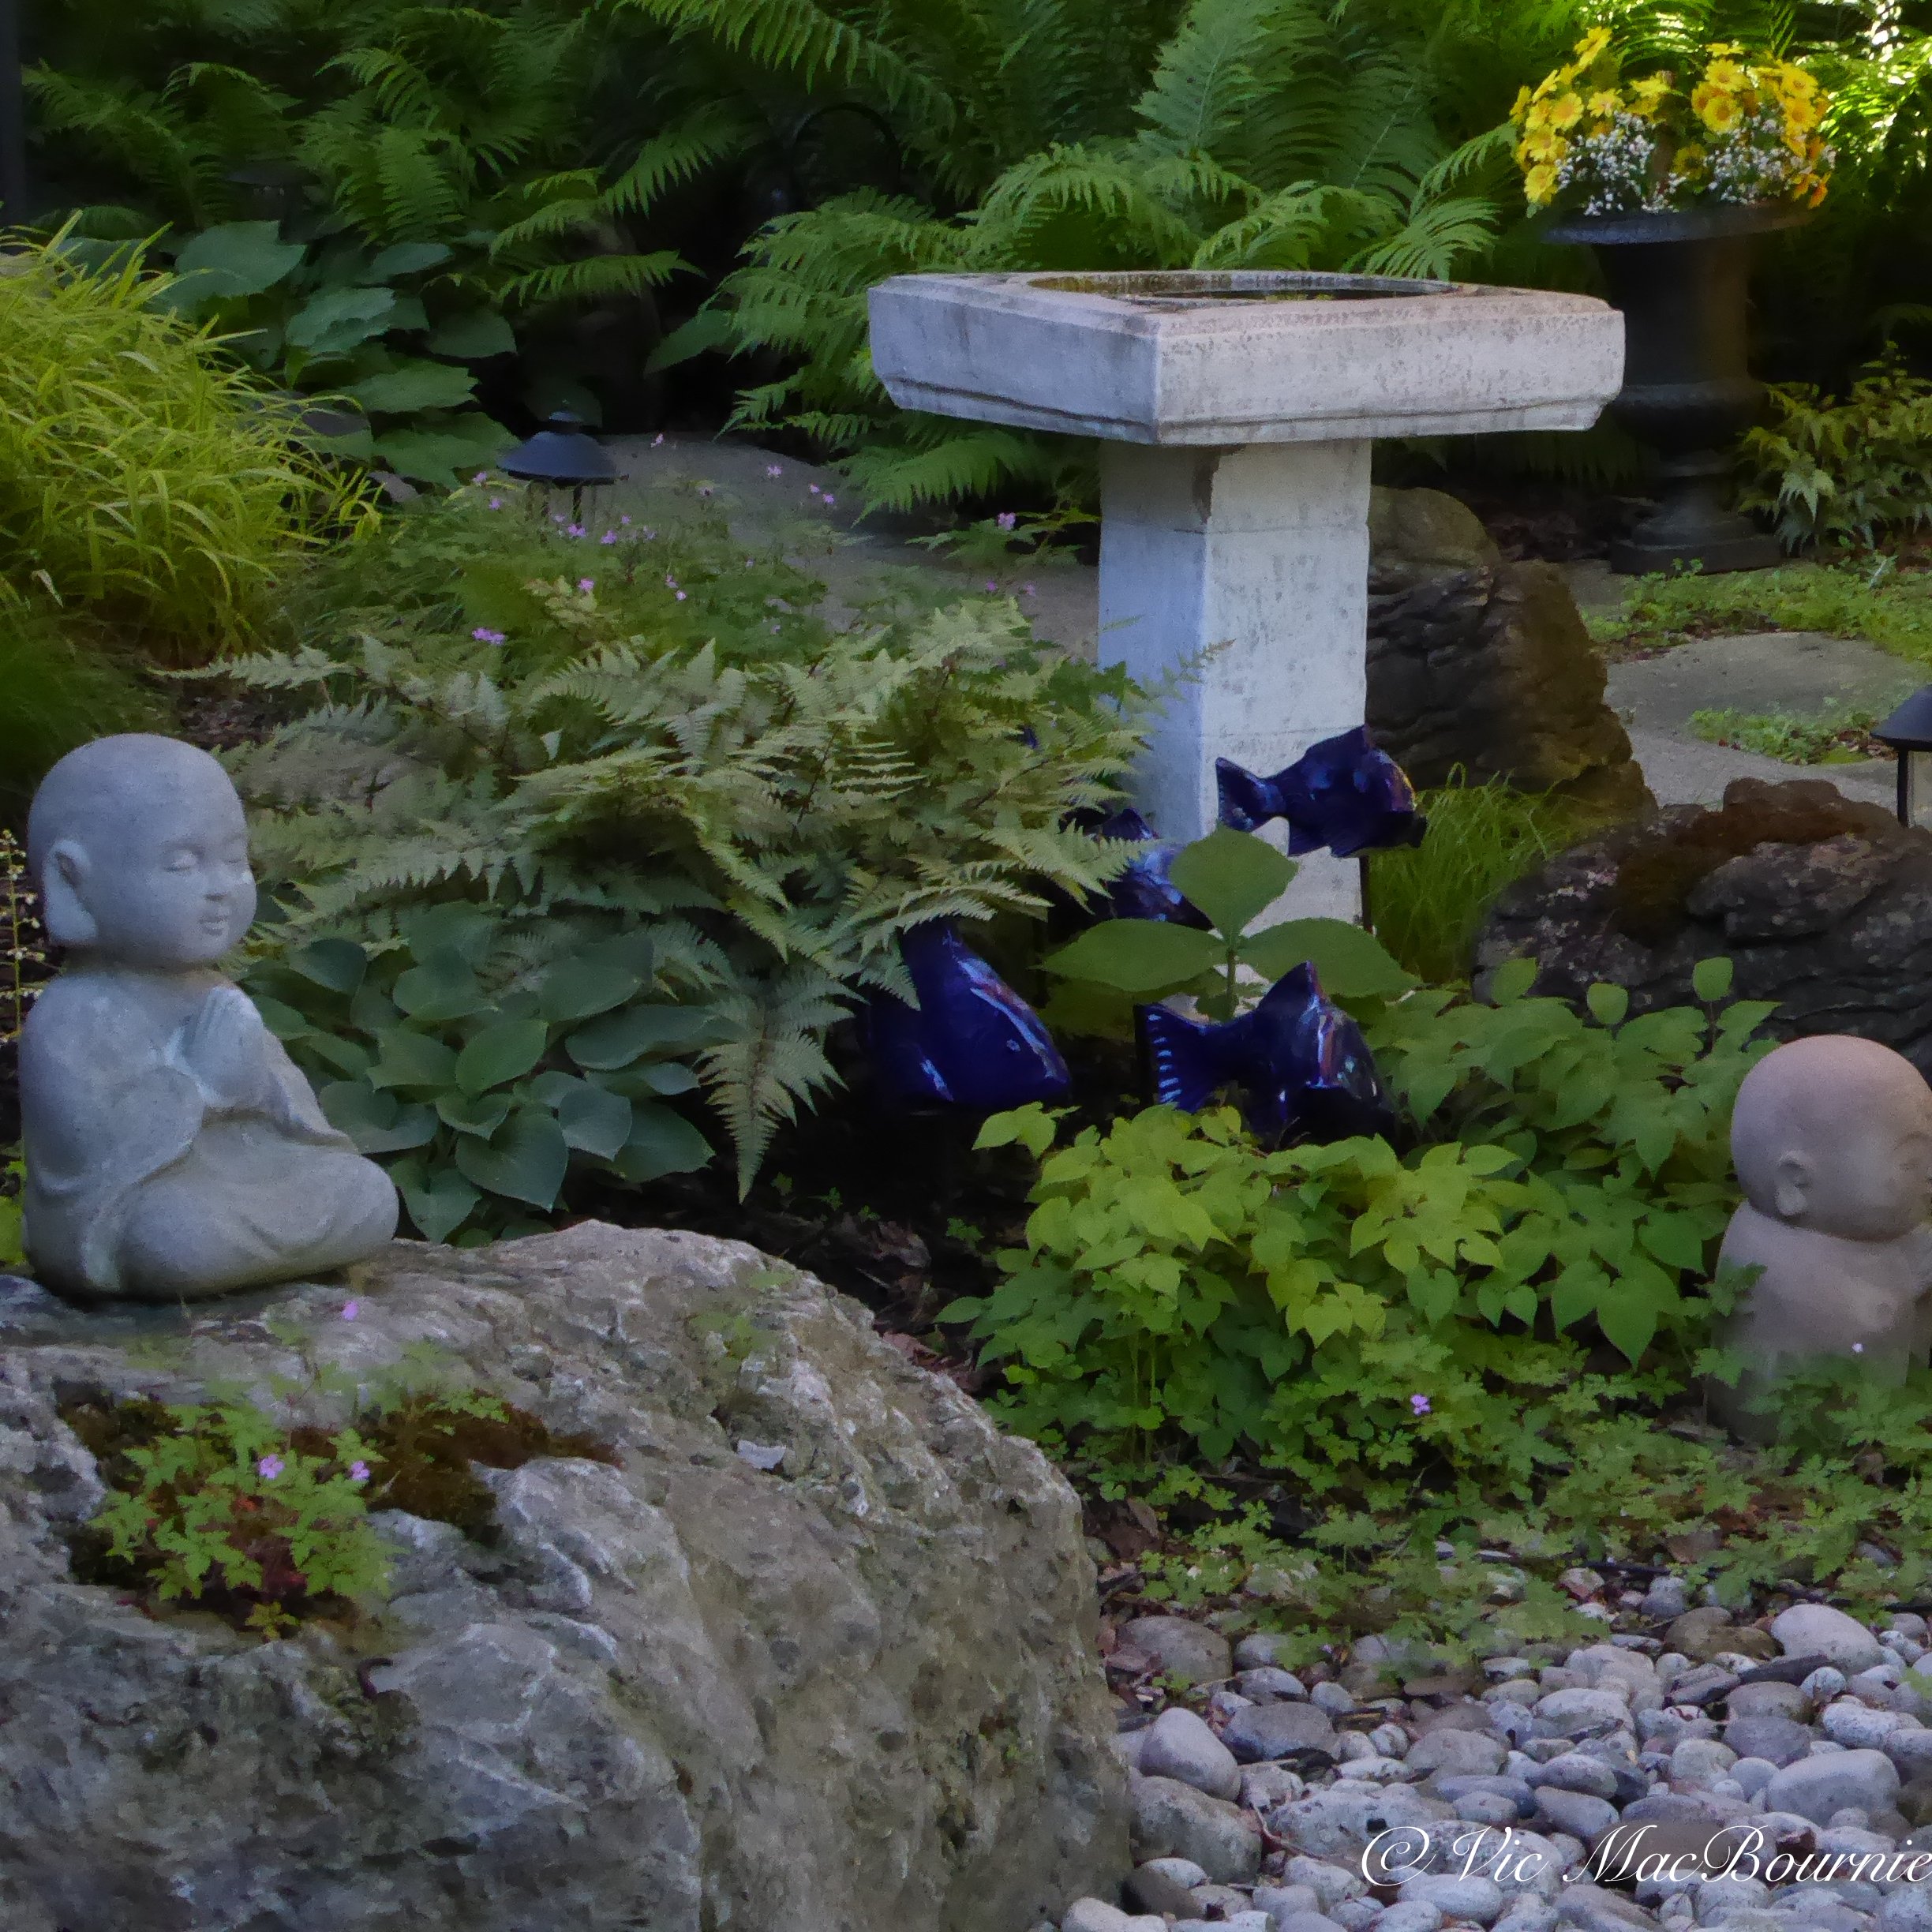 Japanese Garden with Fish In The Garden moving through ferns and epimediums.